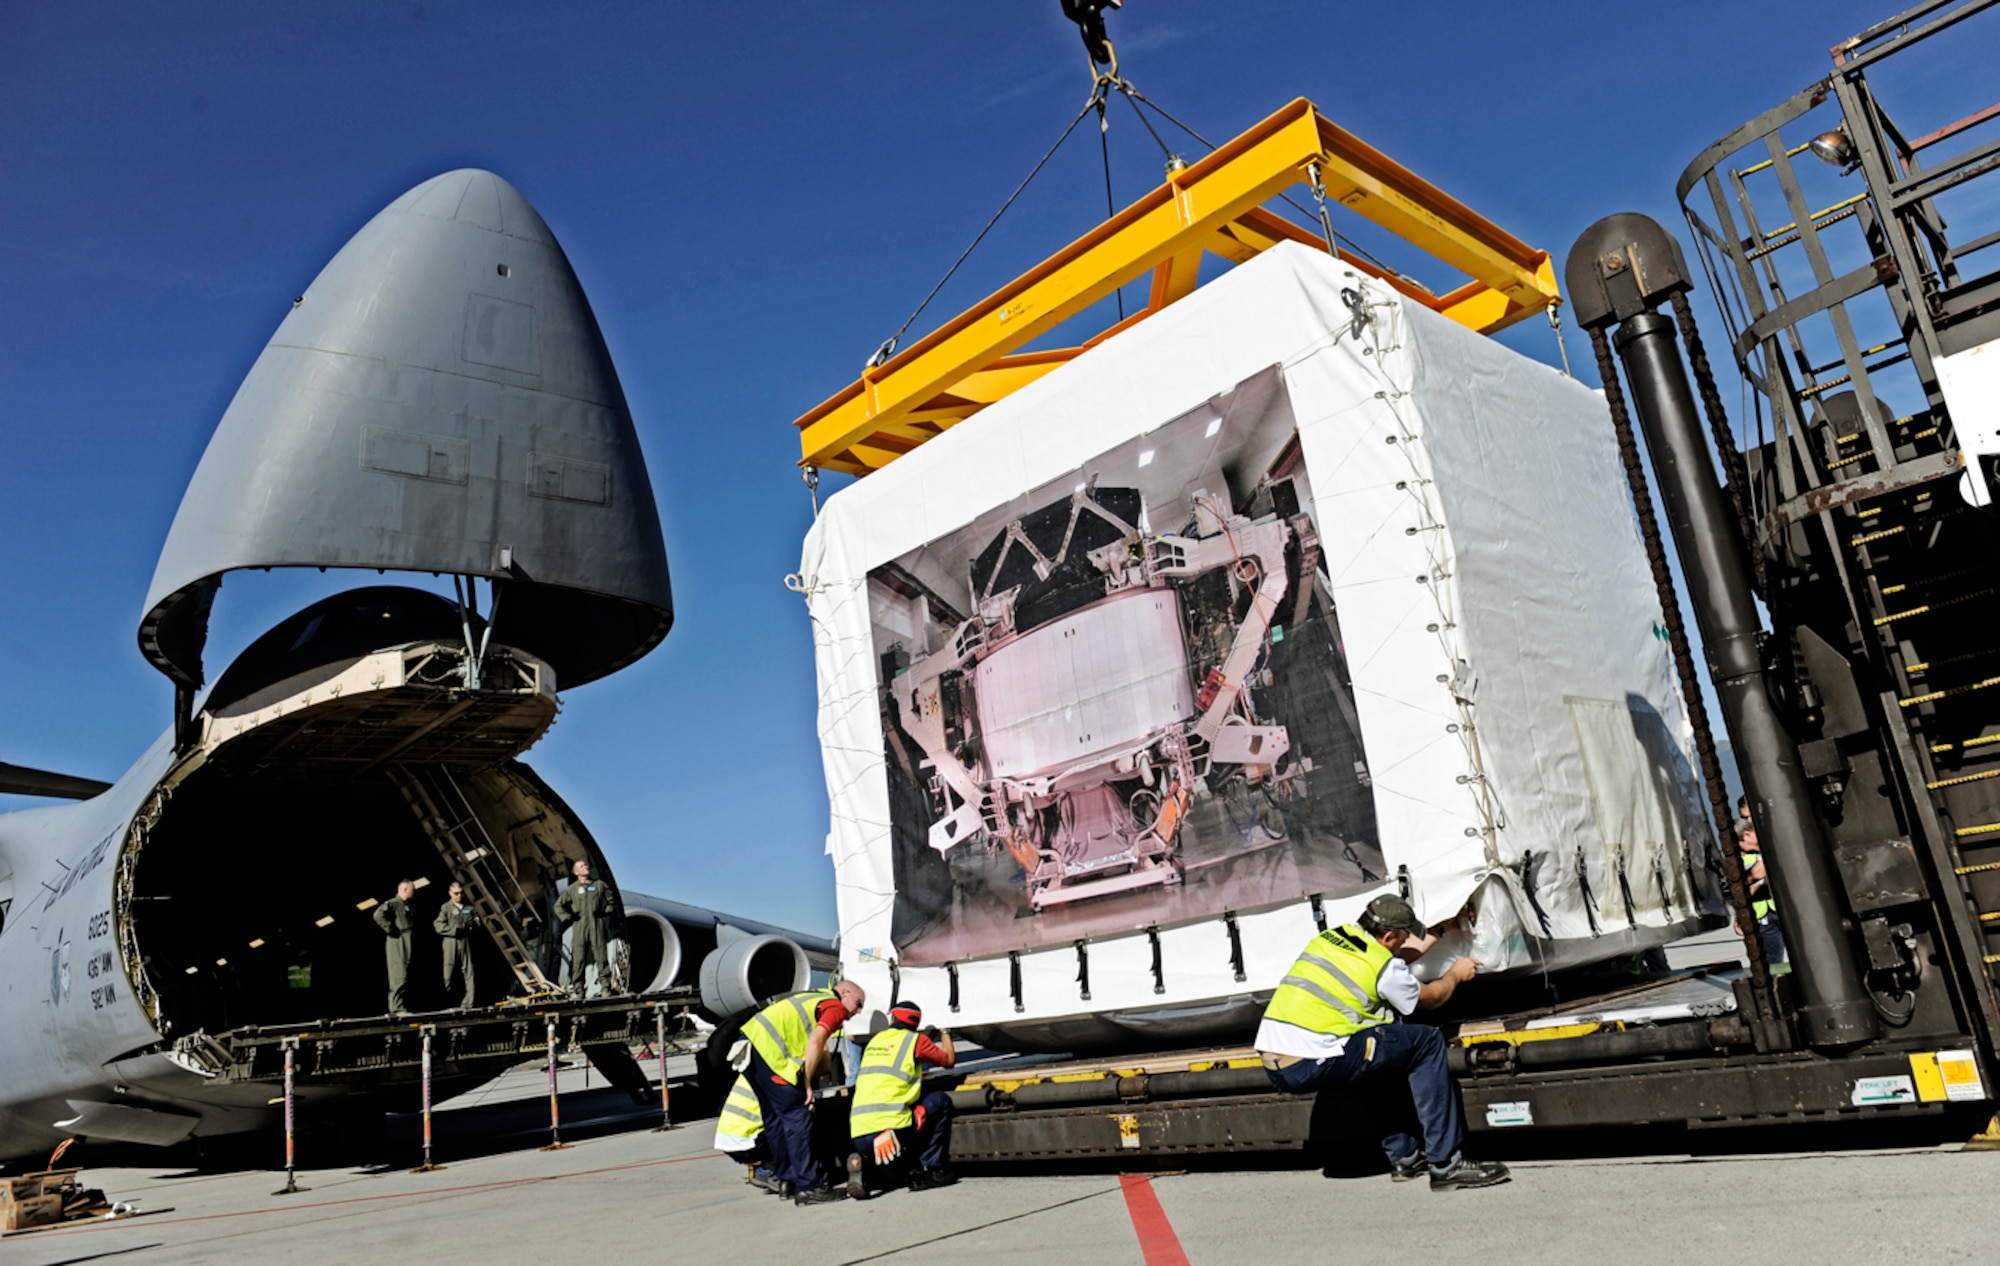 A C-5M Super Galaxy, based out of Dover Air Force Base, Del., is loaded with the Alpha Magnetic Spectrometer Aug. 25, 2010, at the Geneva airport. The AMS is the brain child of Nobel laureate, Dr. Samuel Ting and has been in production for 16 years. The purpose of the experiment is to detect and analyze particles found in space while docked to the International Space Station. (U.S. Air Force photo/Staff Sgt. Ryan Crane)